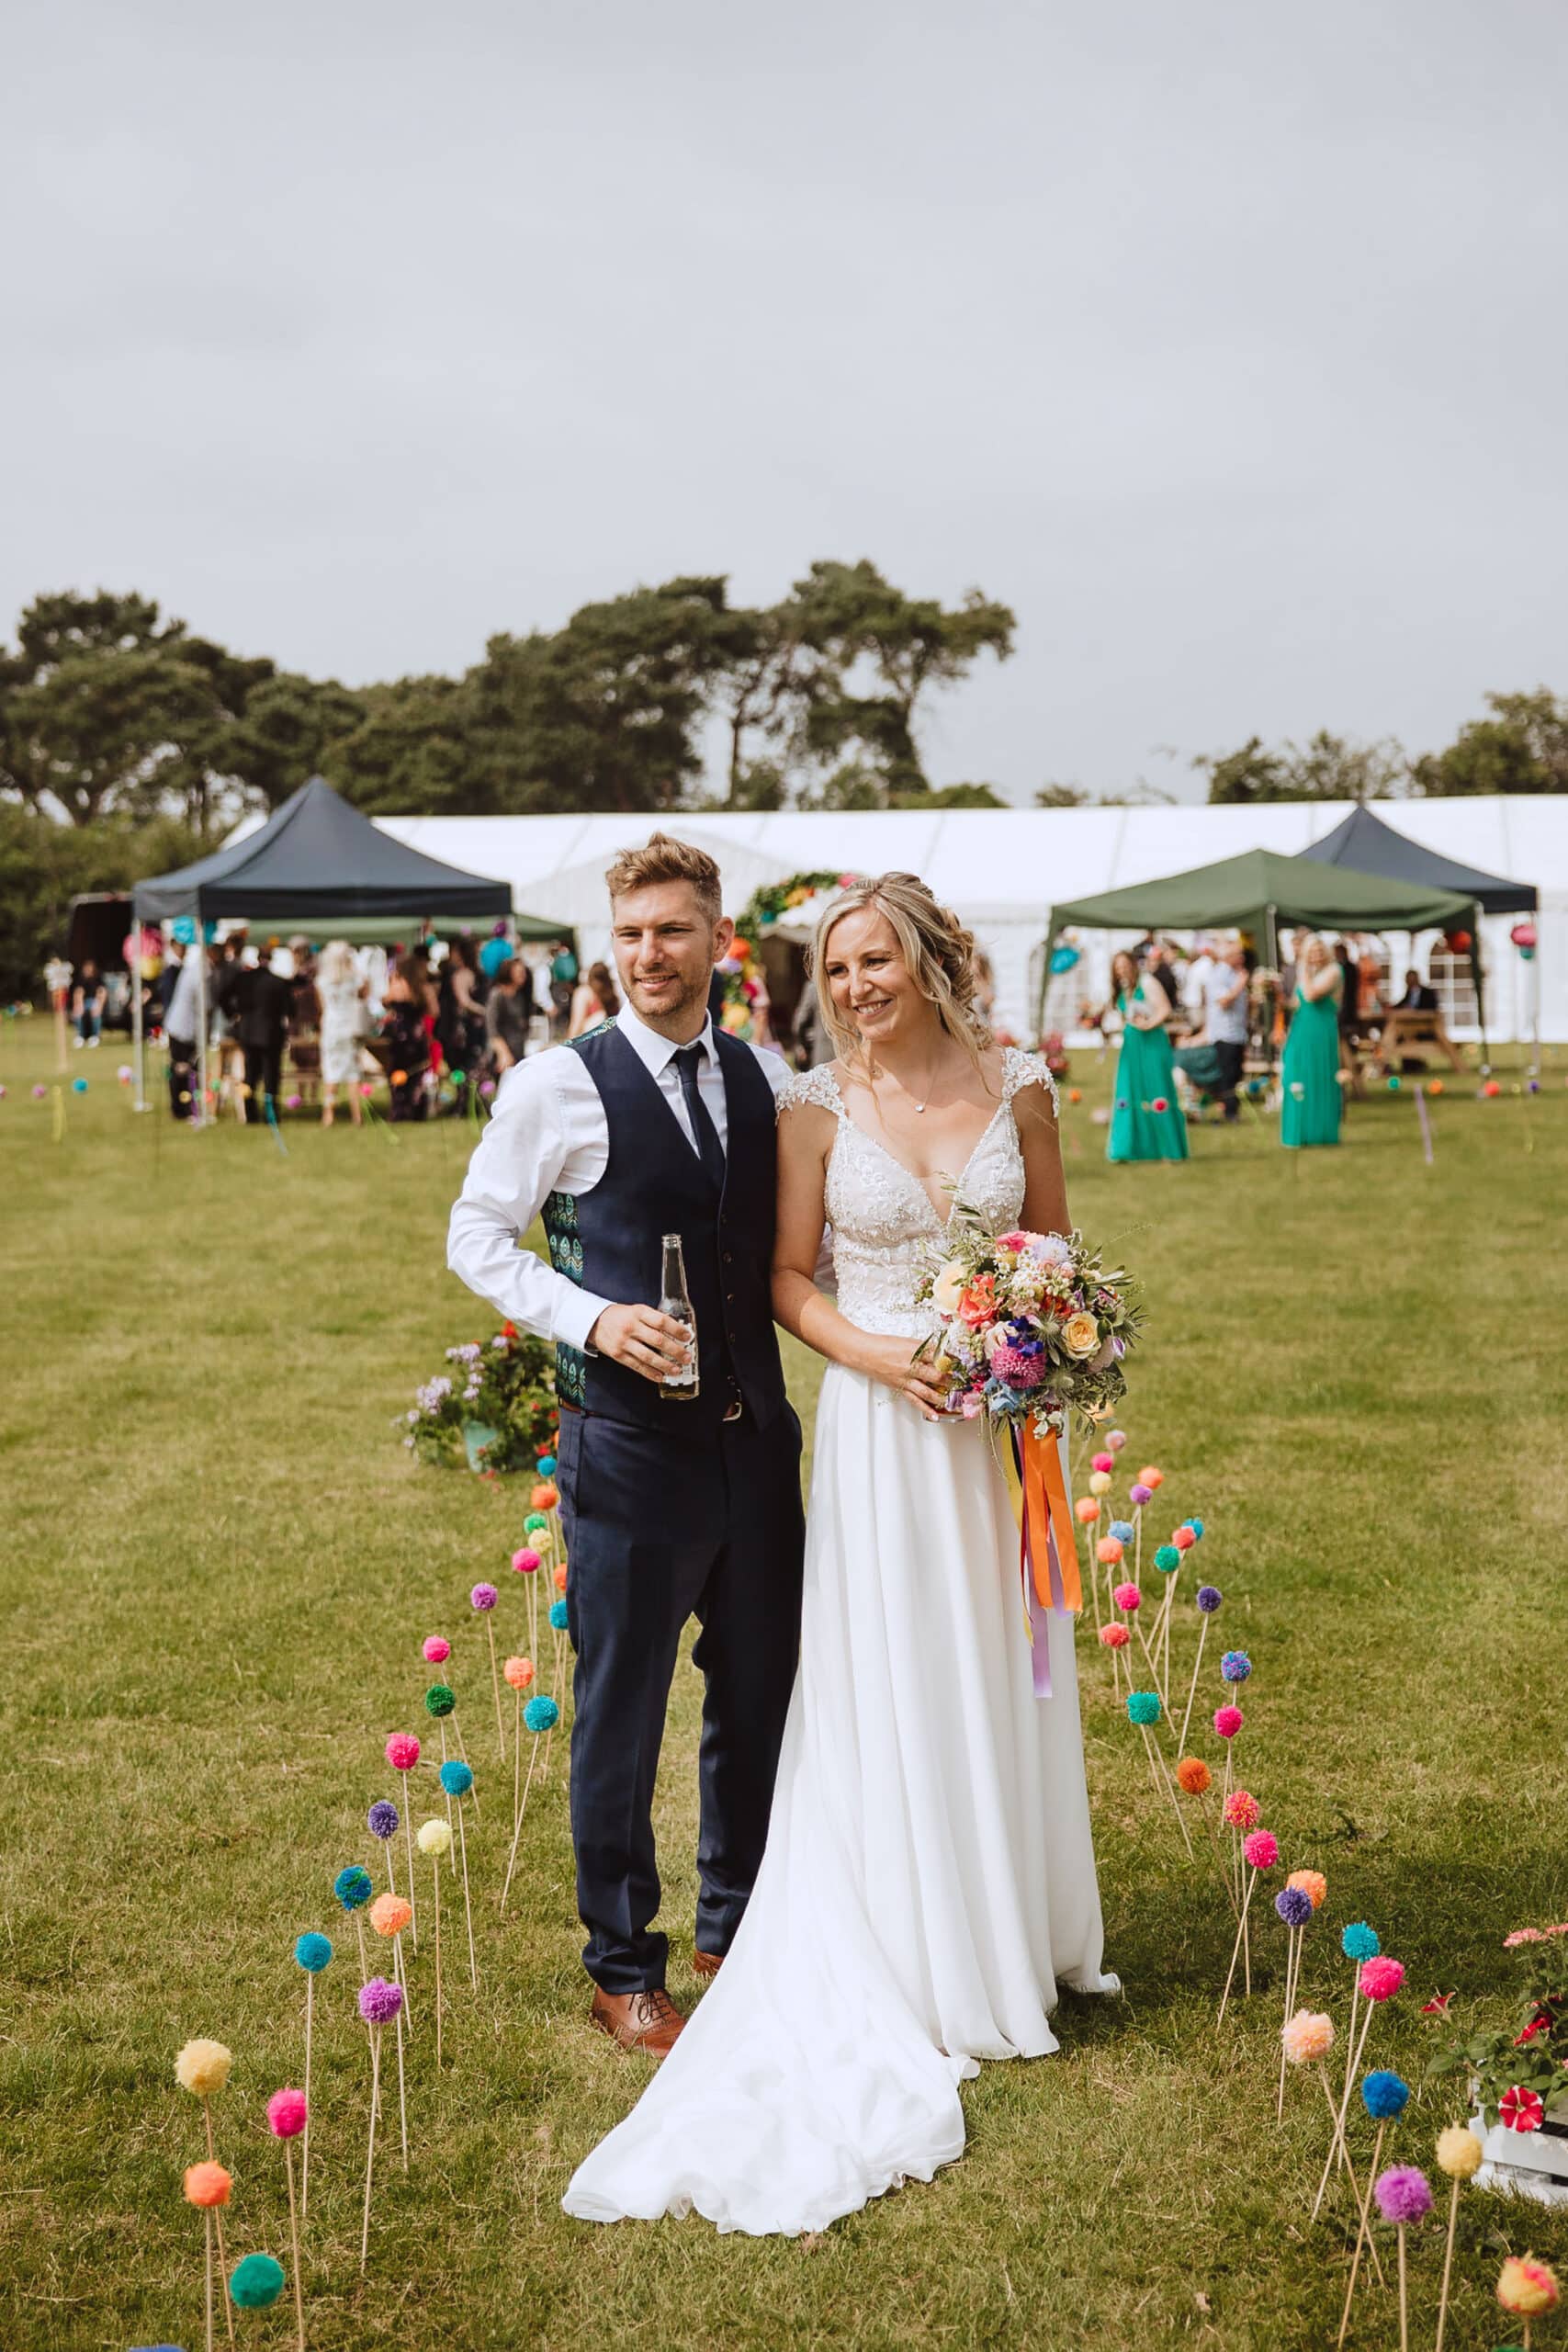 Charlotte and James admiring their colourful DIY wedding